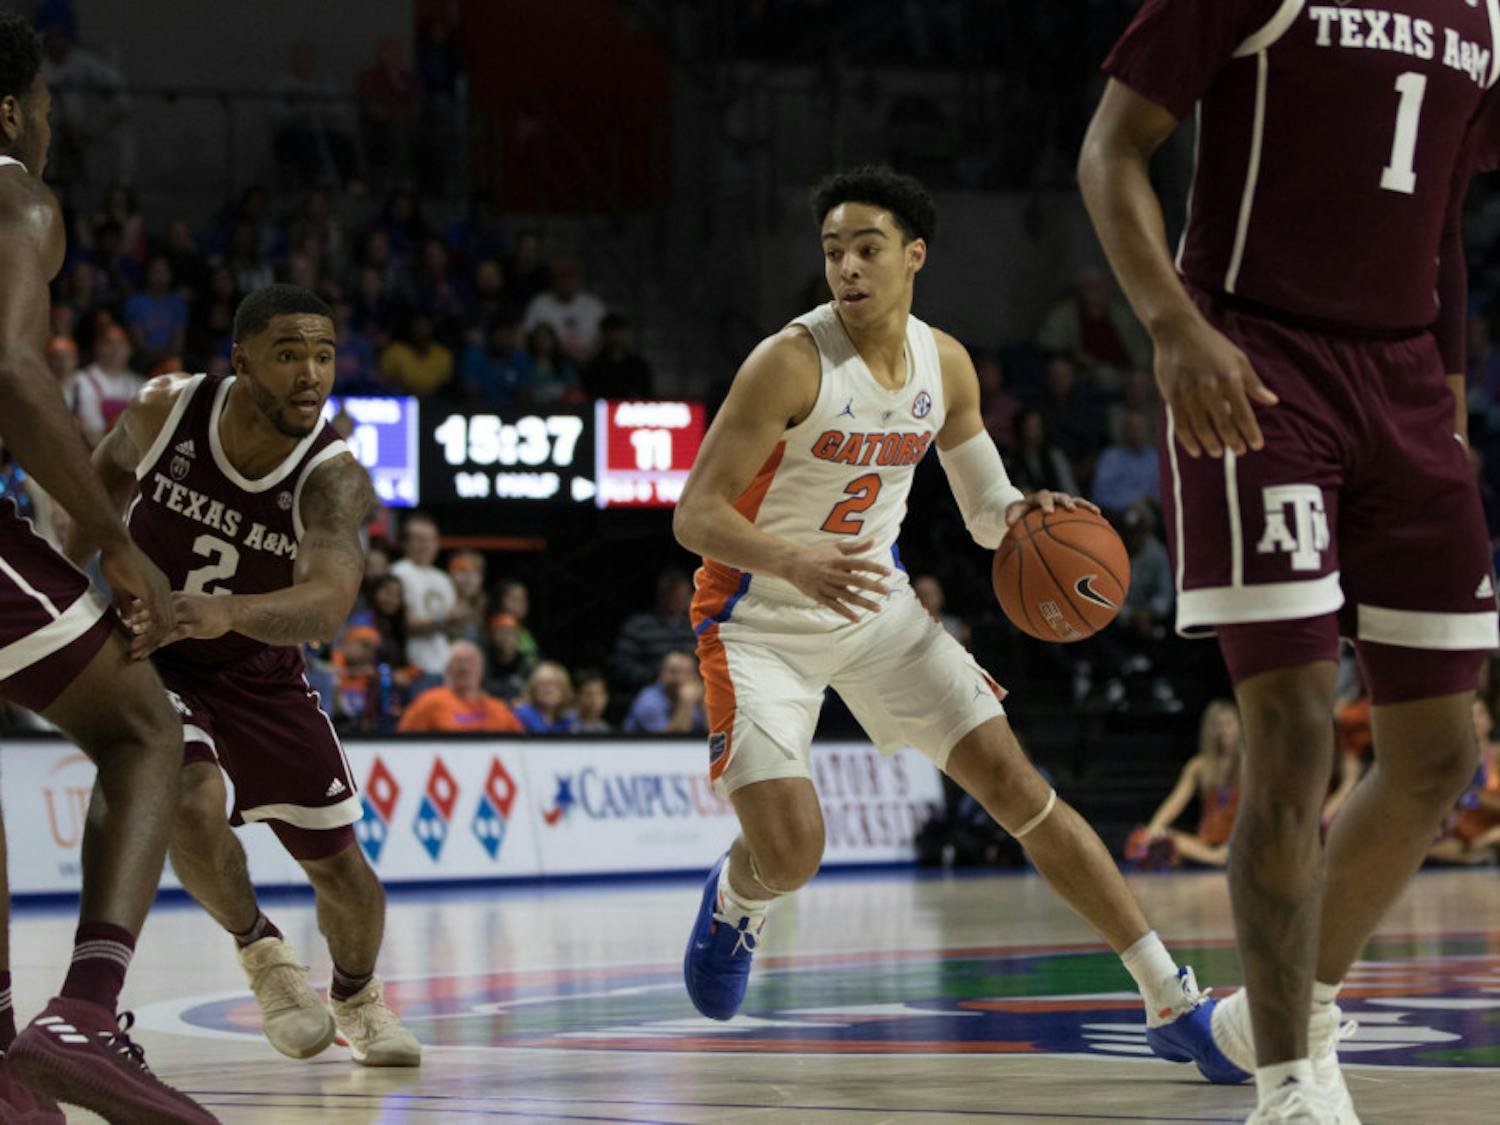 Florida guard Andrew Nembhard recorded 11 assists in Florida's 81-72 win over Texas A&amp;M on Jan. 22.
&nbsp;